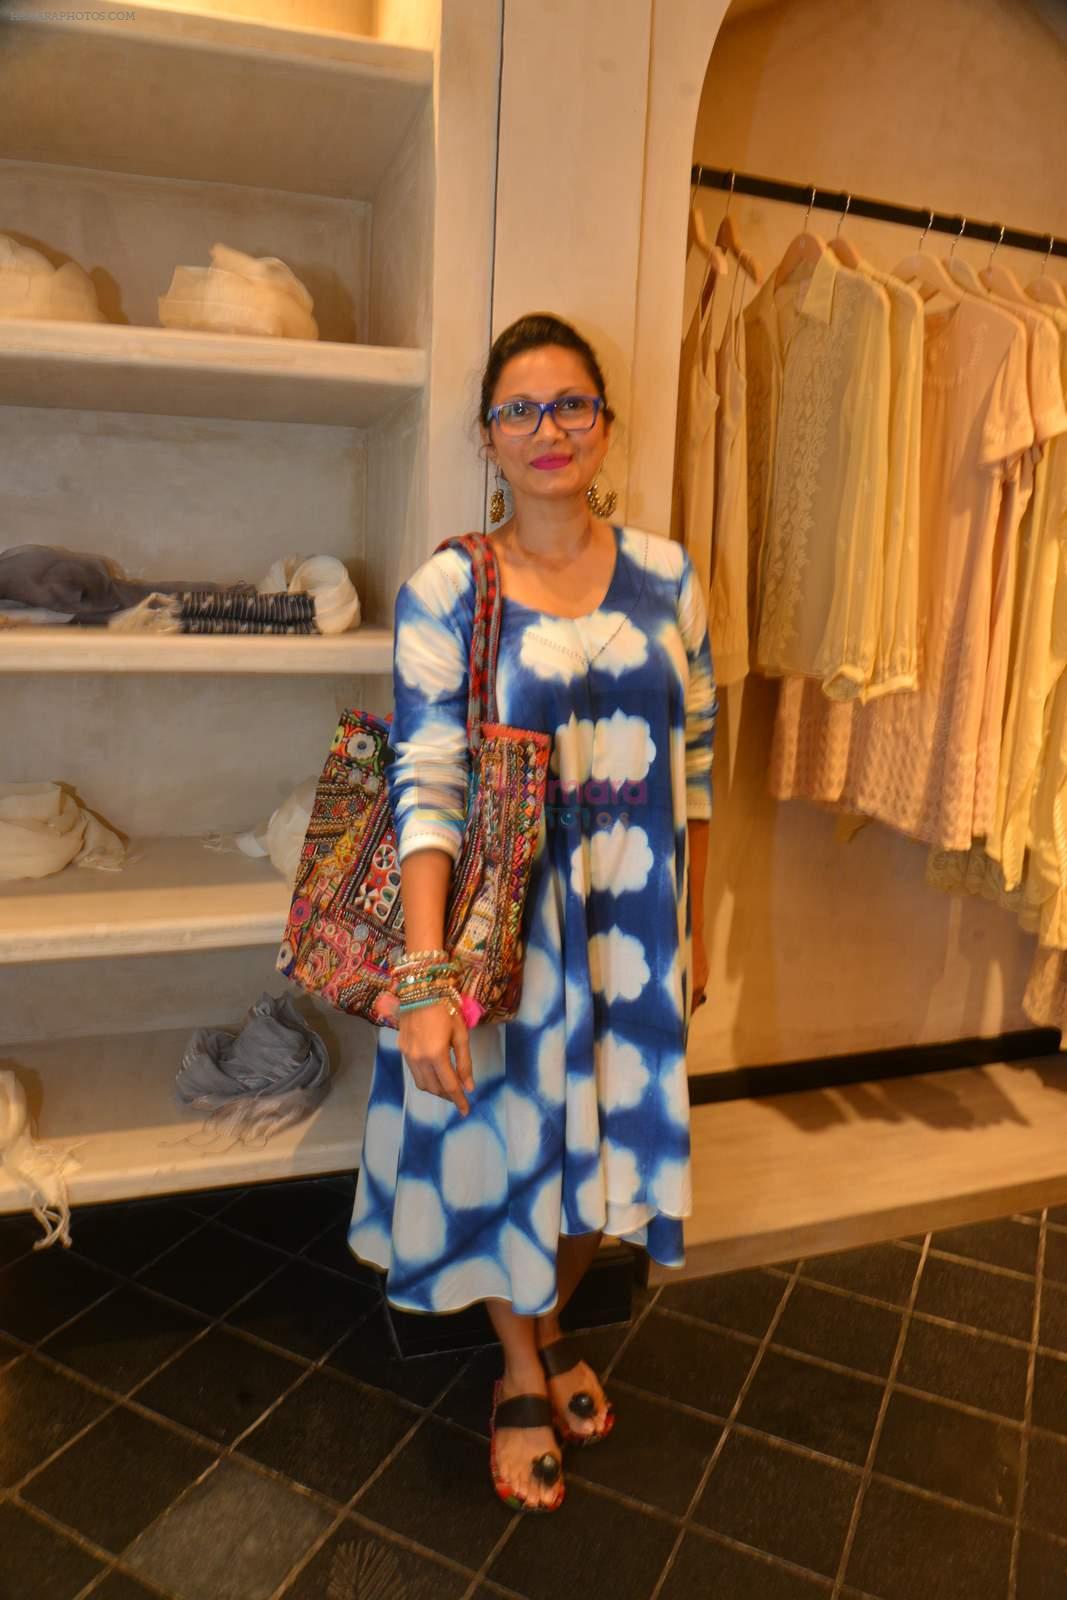 Maria Goretti at Anita Dongre's Grass Root store launch in Khar on 12th Aug 2015